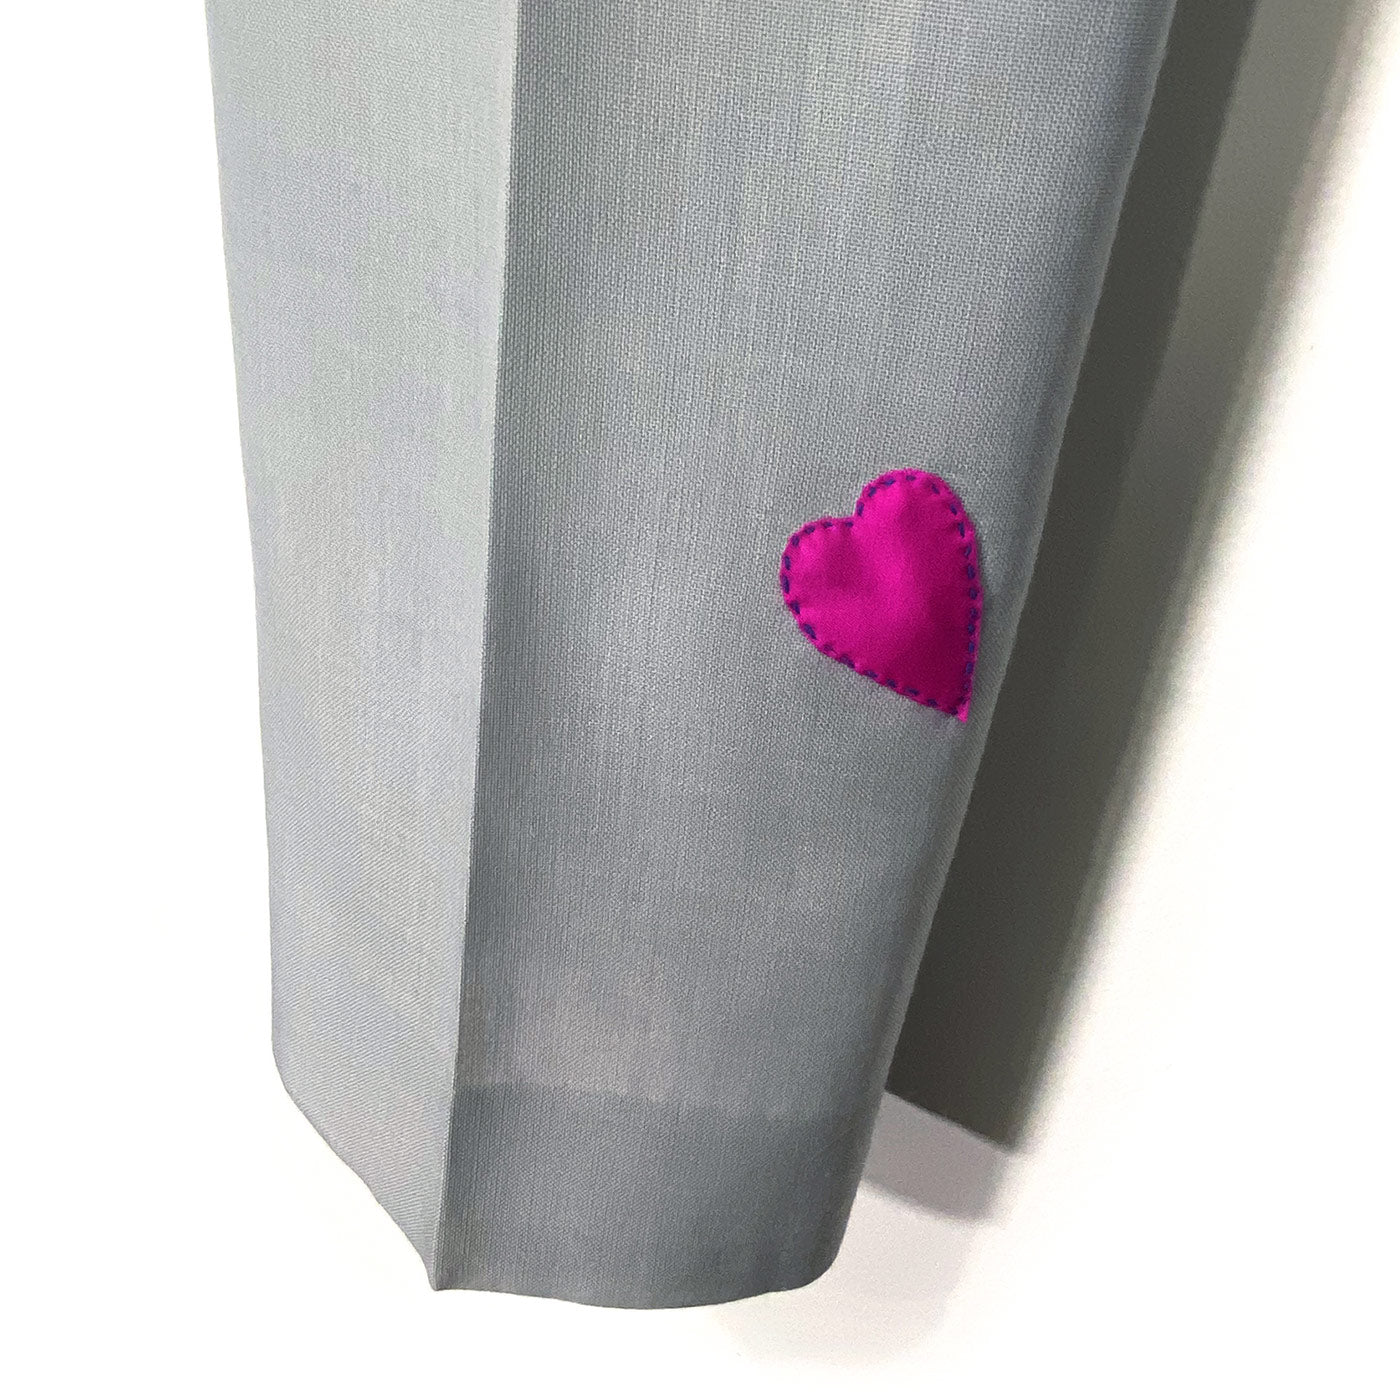 The bottom of one leg of grey trousers with a small pink heart sewn on one side